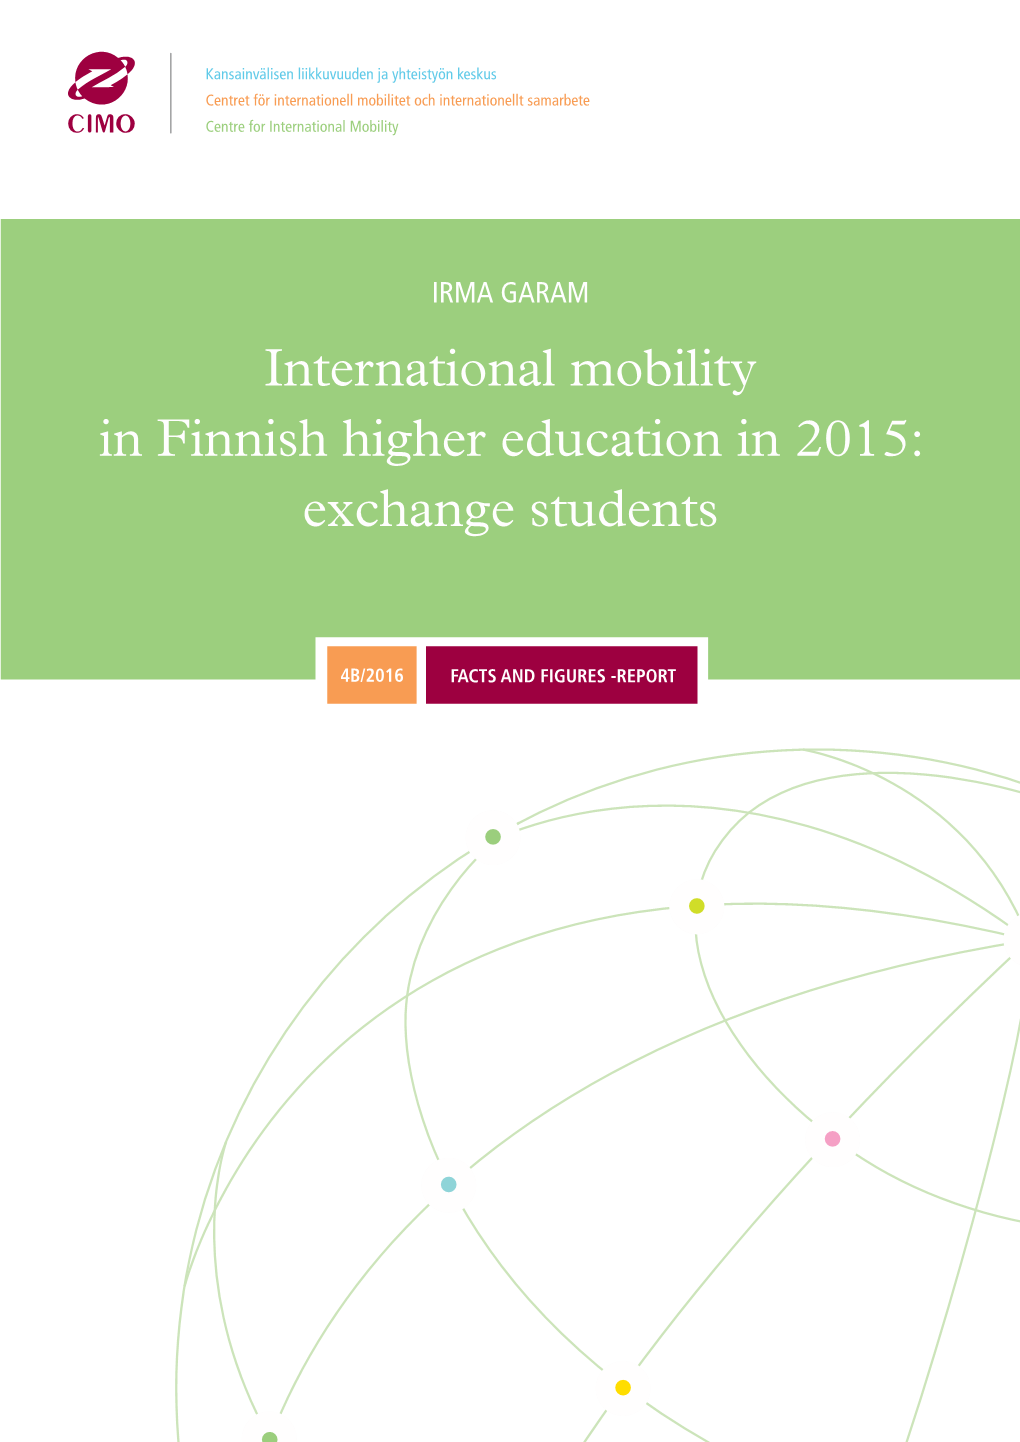 International Mobility in Finnish Higher Education in 2015: Exchange Students